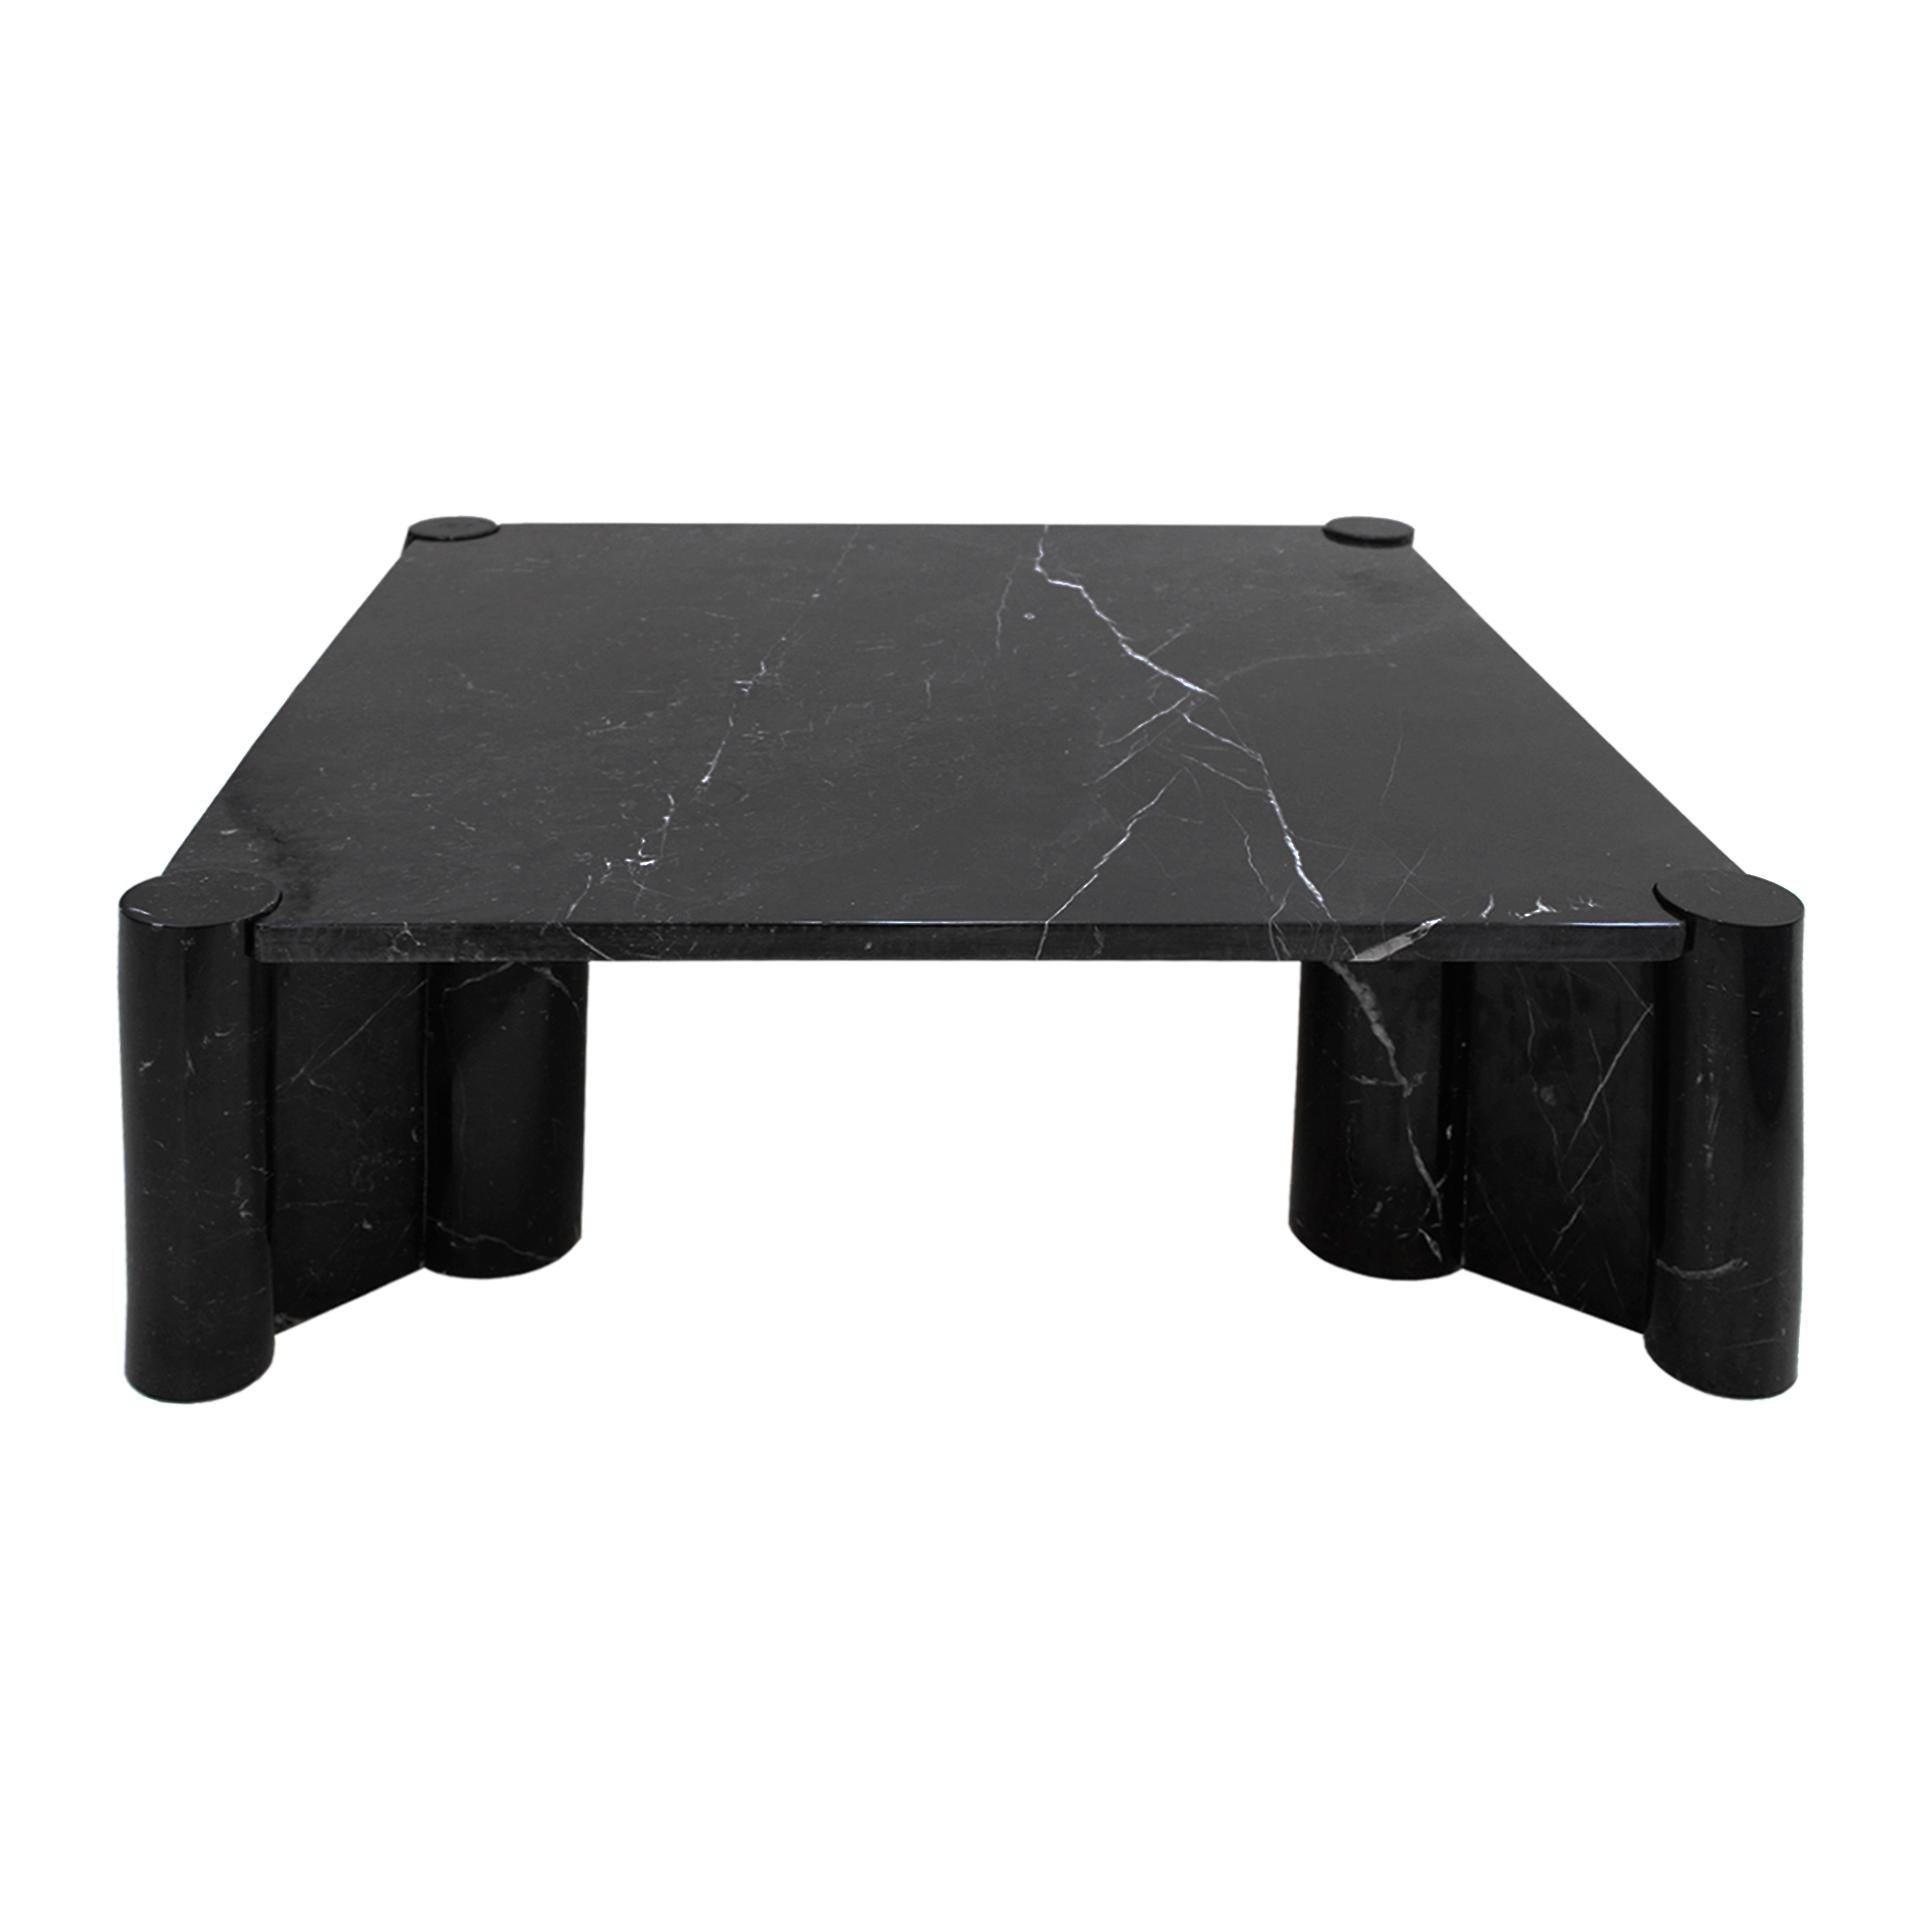 Jumbo coffee table designed by Gae Aulenti (Italy, 1927-1972) for Knoll. Made in Marquina marble.

Gae Aulenti (1927-2012) was one of the few Italian women to rise to prominence in architecture and design in the postwar years. Her work includes